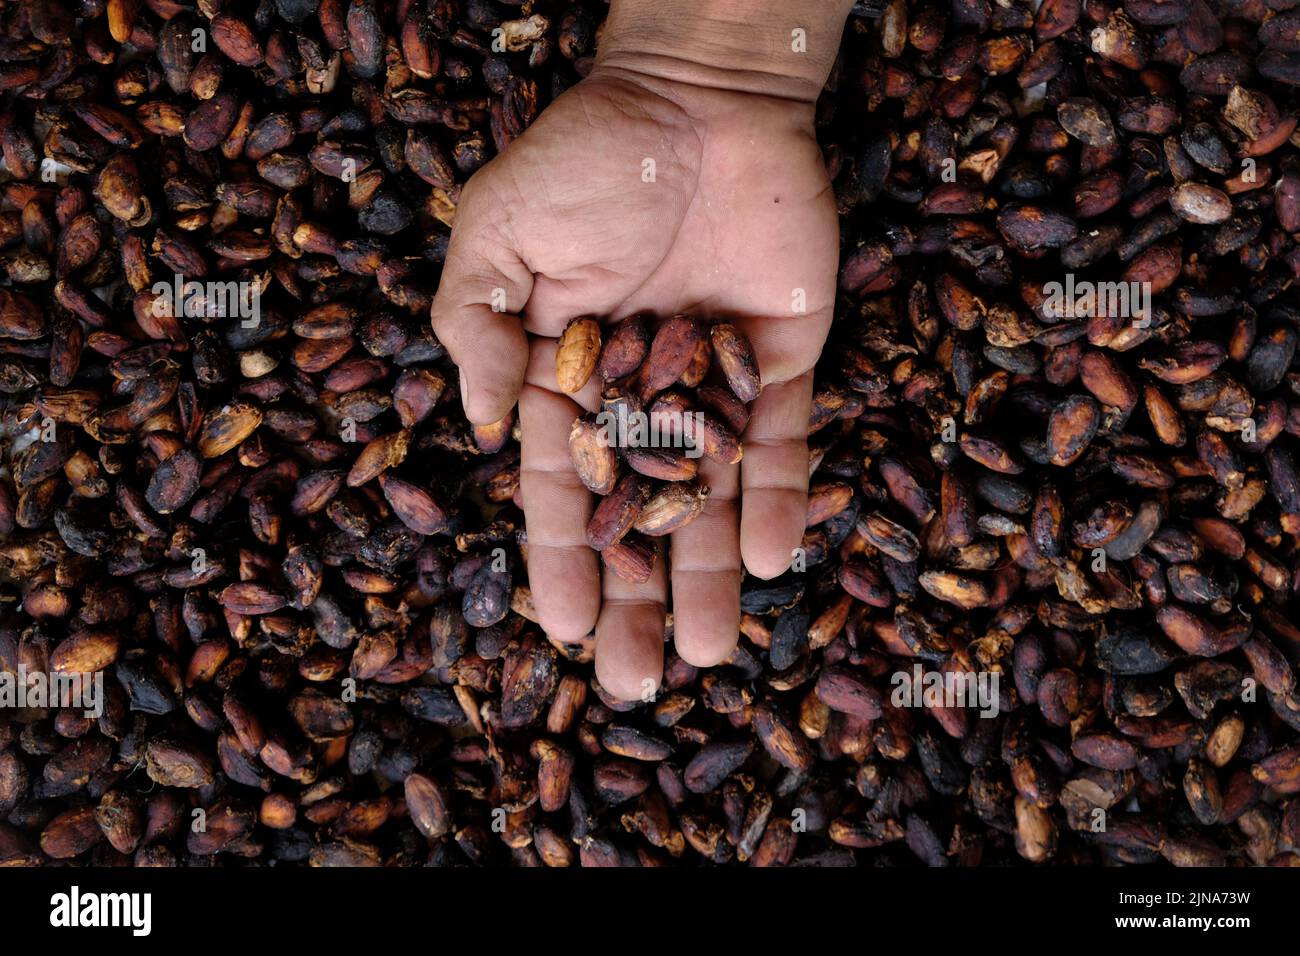 Overhead view of a farmer holding a handful of freshly picked cocoa beans Stock Photo